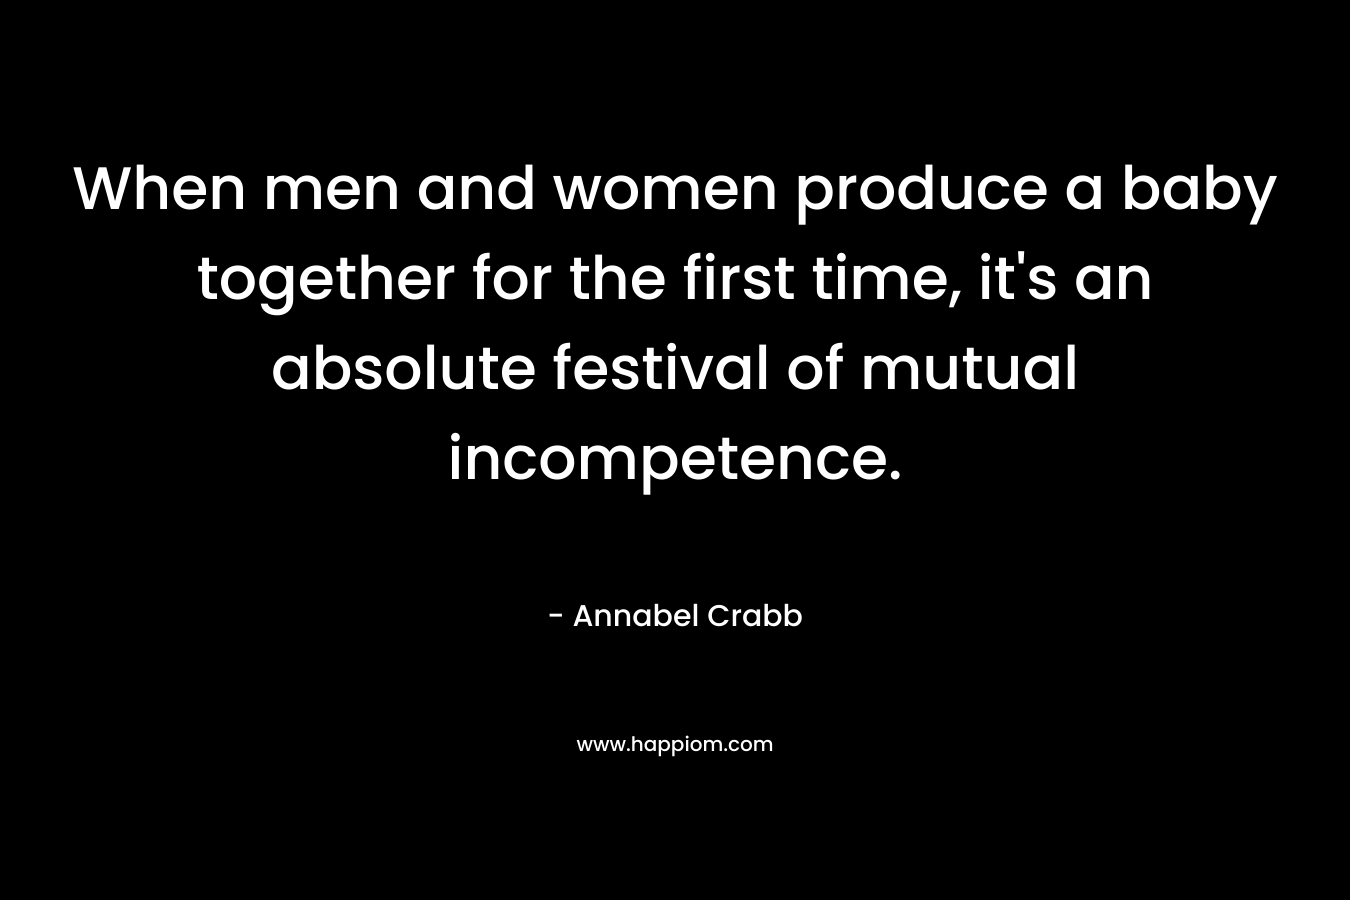 When men and women produce a baby together for the first time, it’s an absolute festival of mutual incompetence. – Annabel Crabb